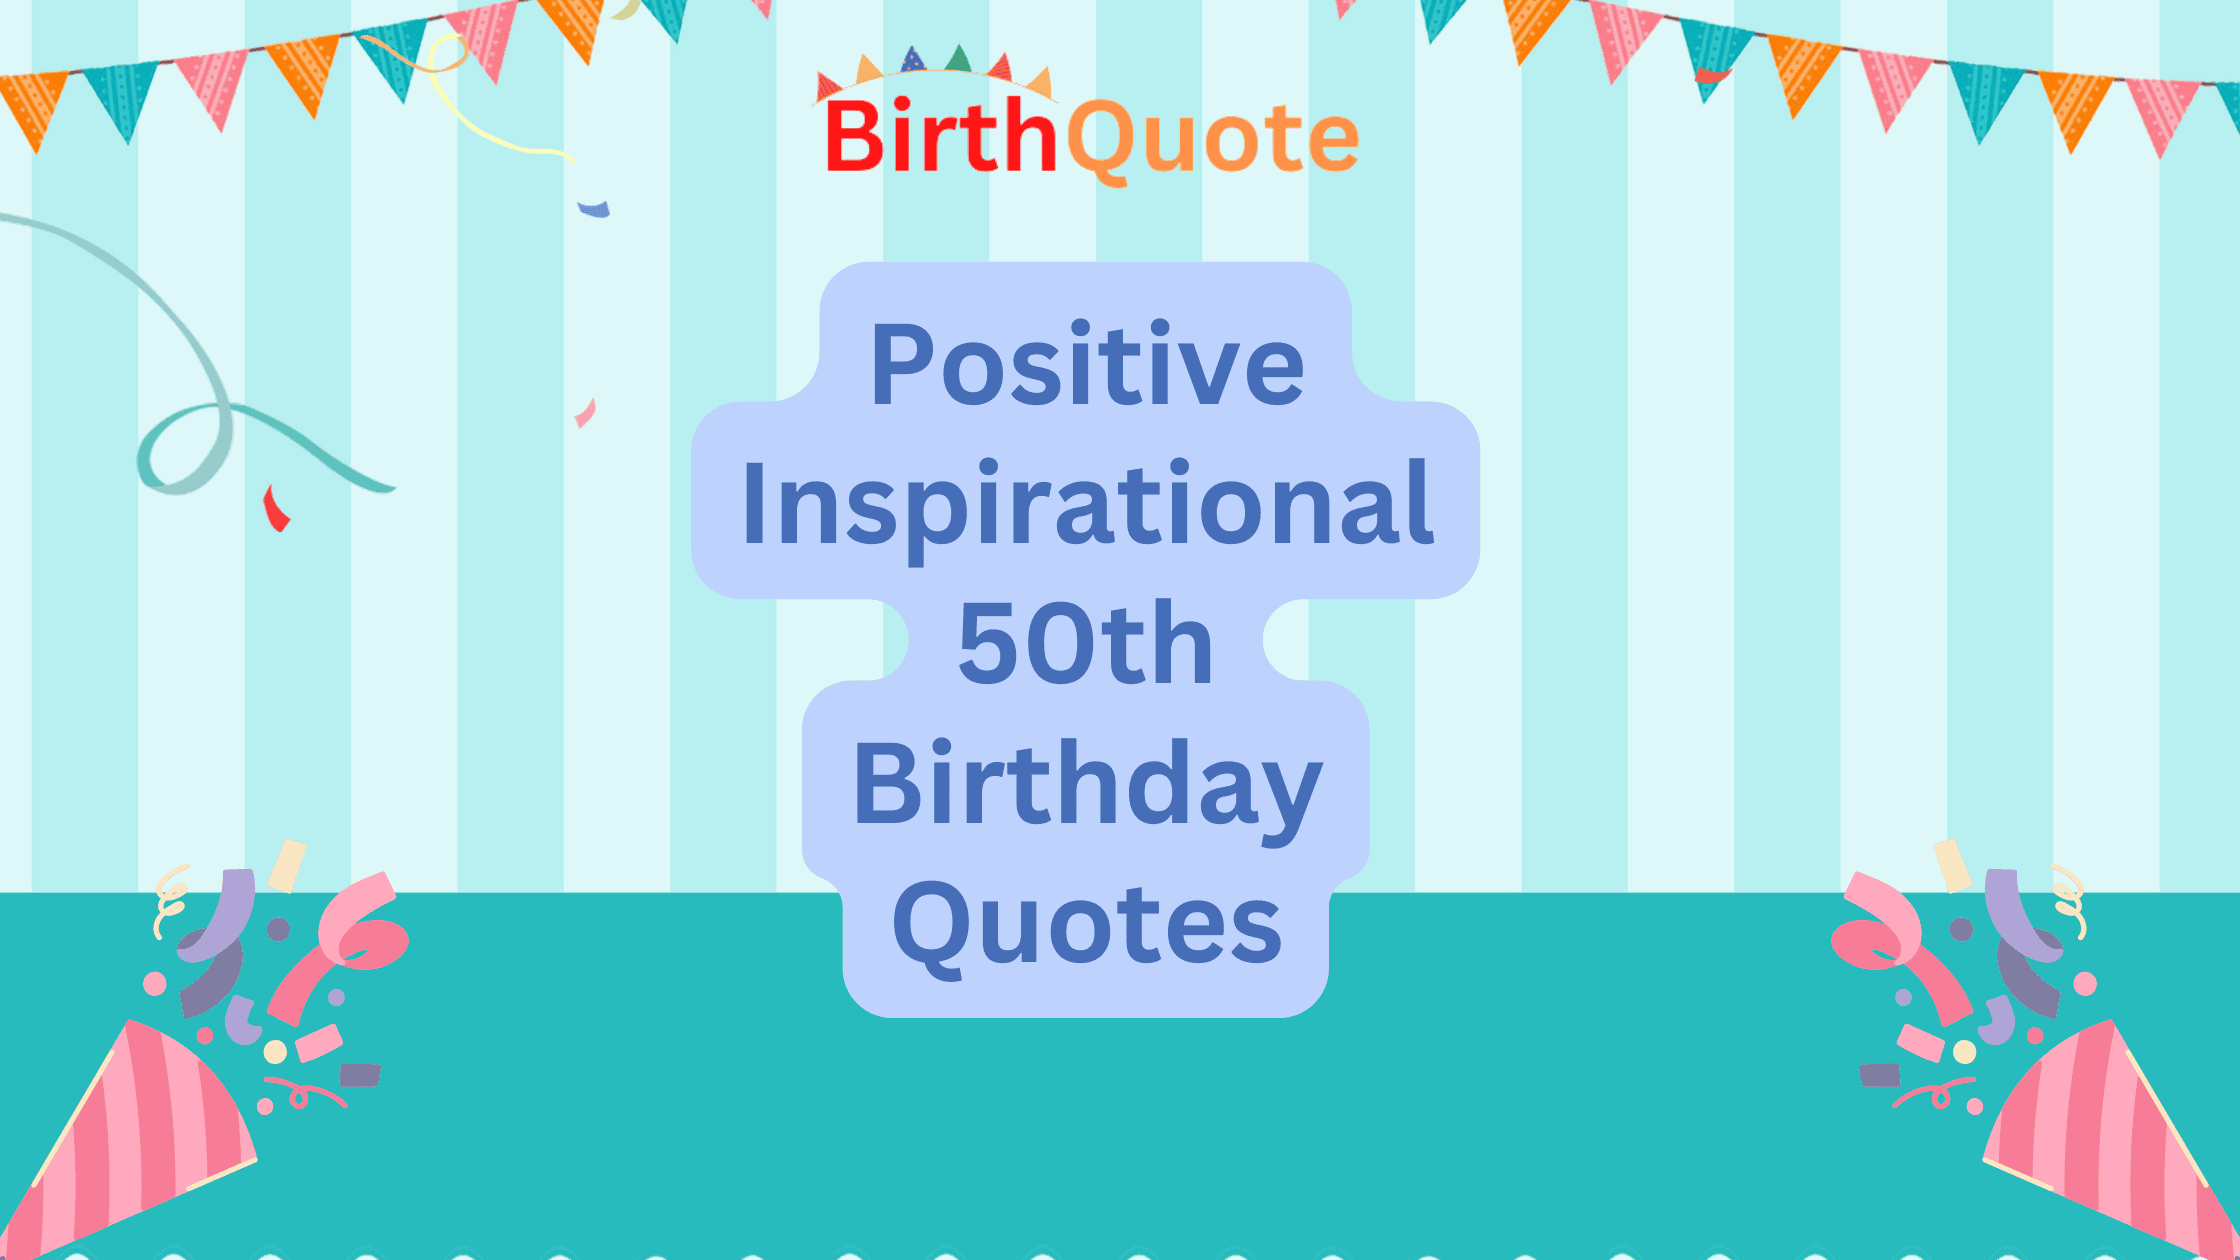 Positive Inspirational 50th Birthday Quotes